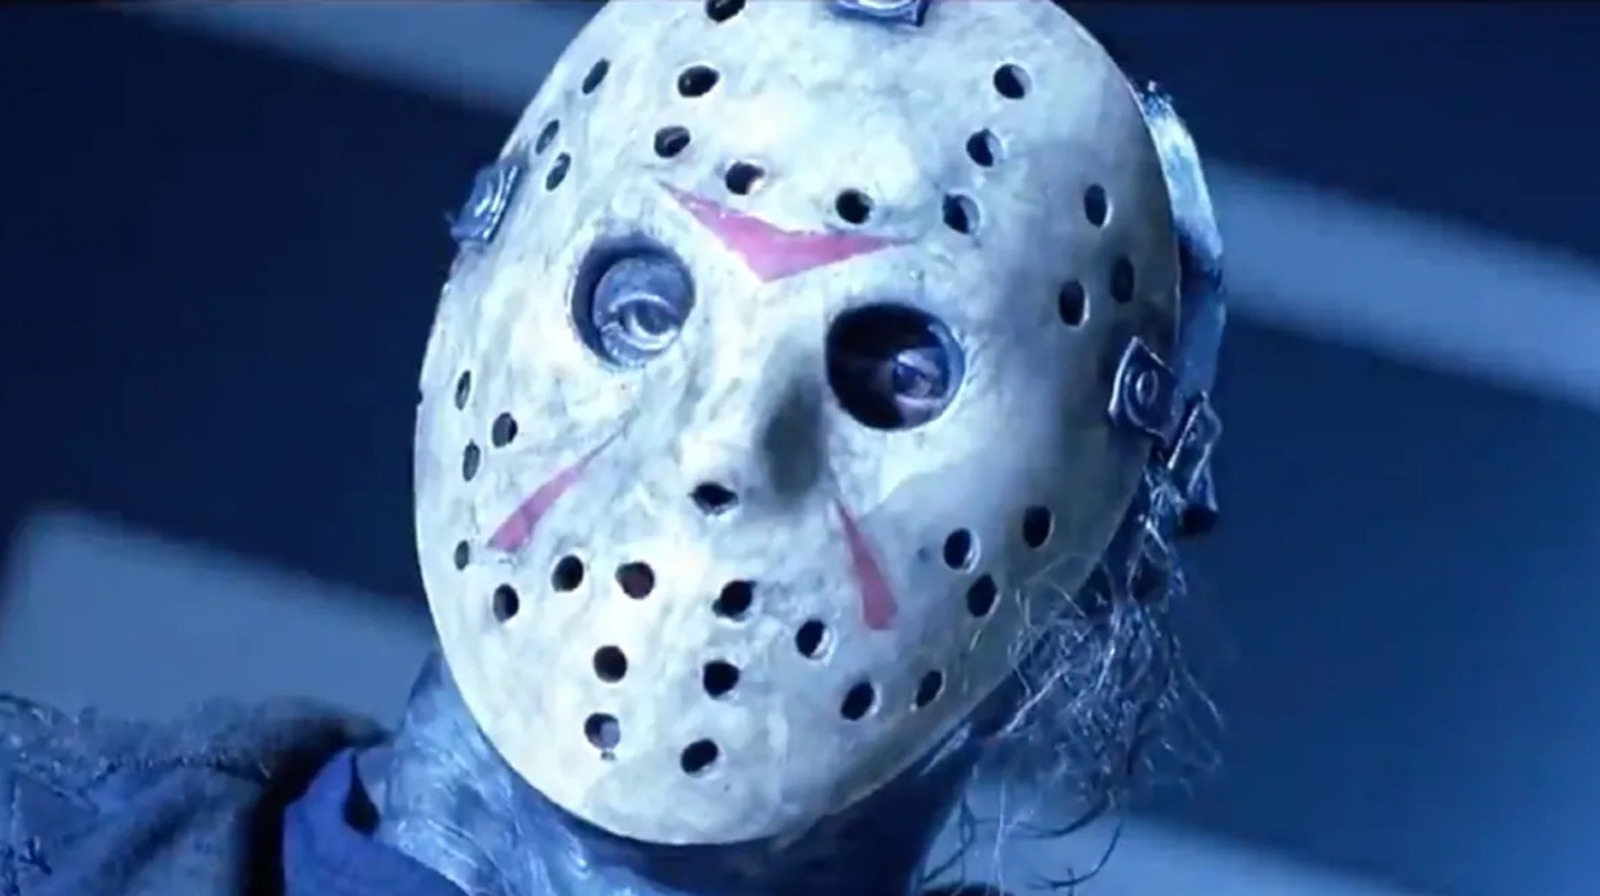 Jason Voorhees Most Brutal Friday The Th Kill Scenes Ranked By Savagery